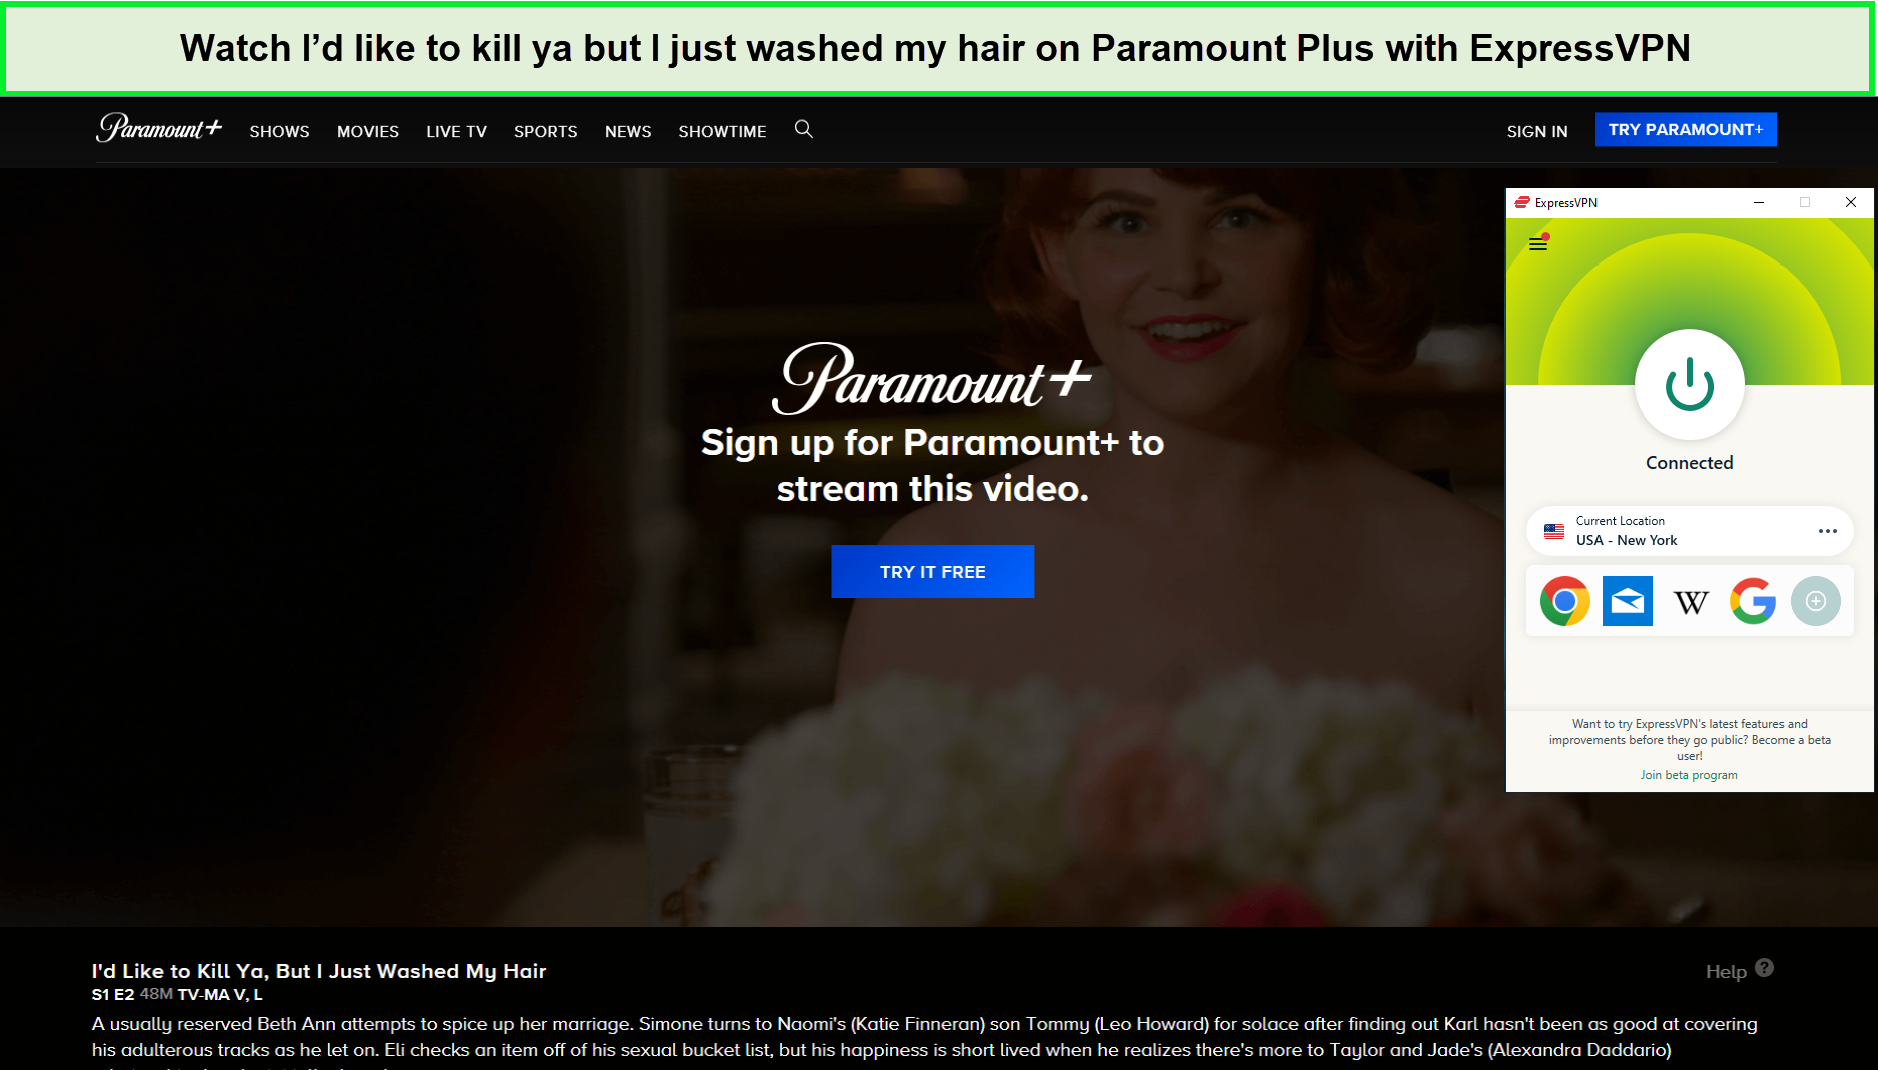 Watch-Id-like-to-kill-ya-but-I-just-washed-my-hair-in-Australiaon-Paramount-Plus-with-ExpressVPN